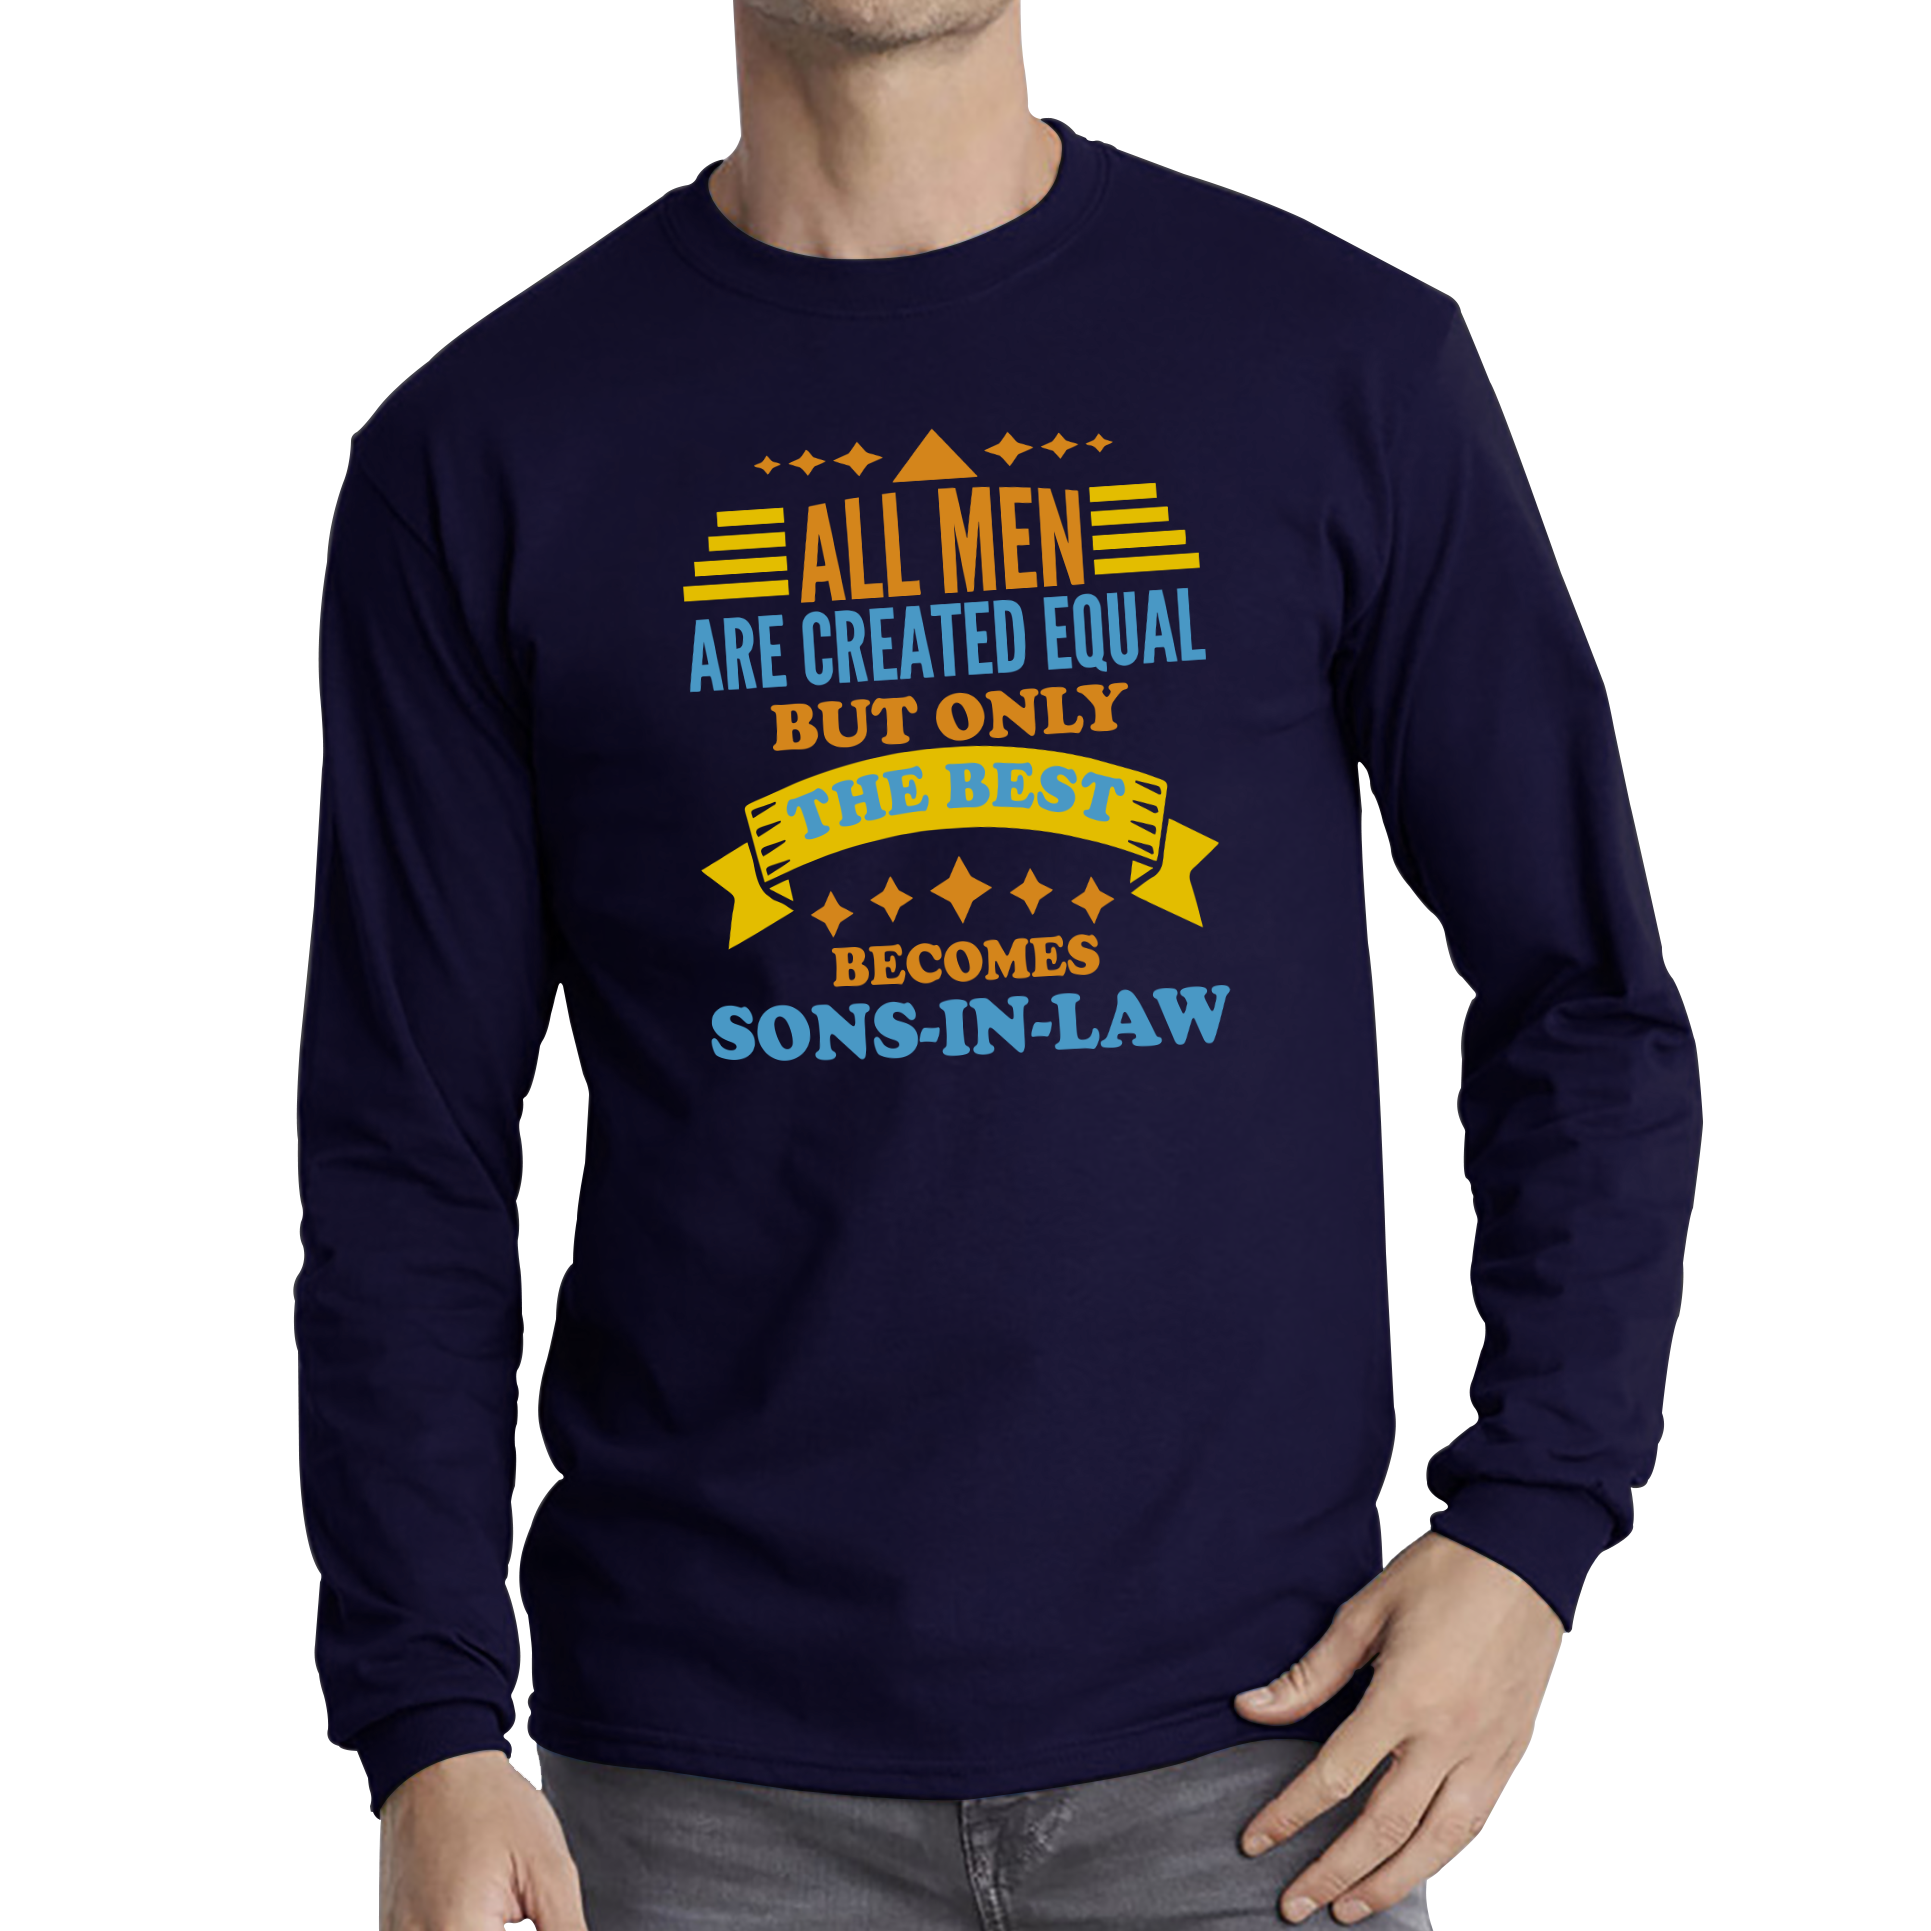 All Men Are Created Equal But Only The Best Becomes Sons-In-Law Long Sleeve T Shirt